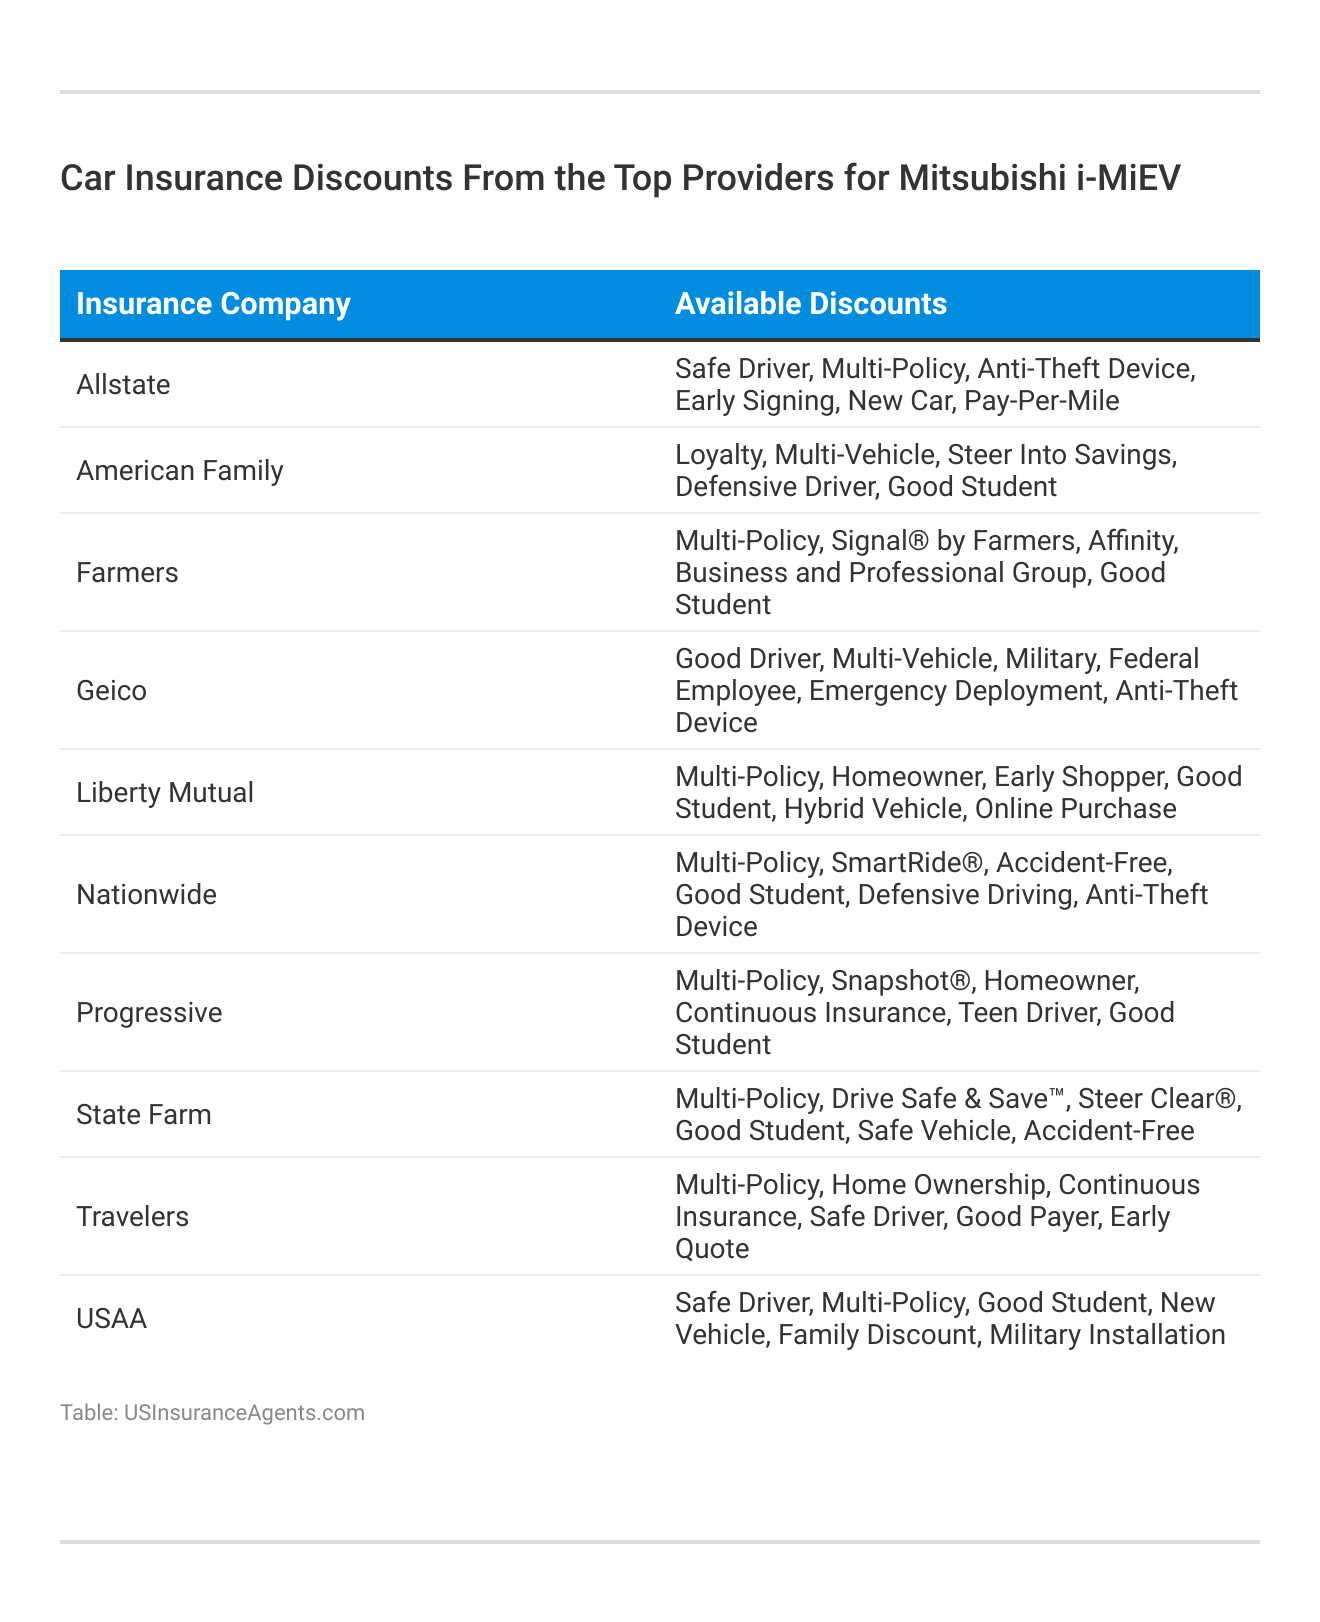 <h3>Car Insurance Discounts From the Top Providers for Mitsubishi i-MiEV</h3>